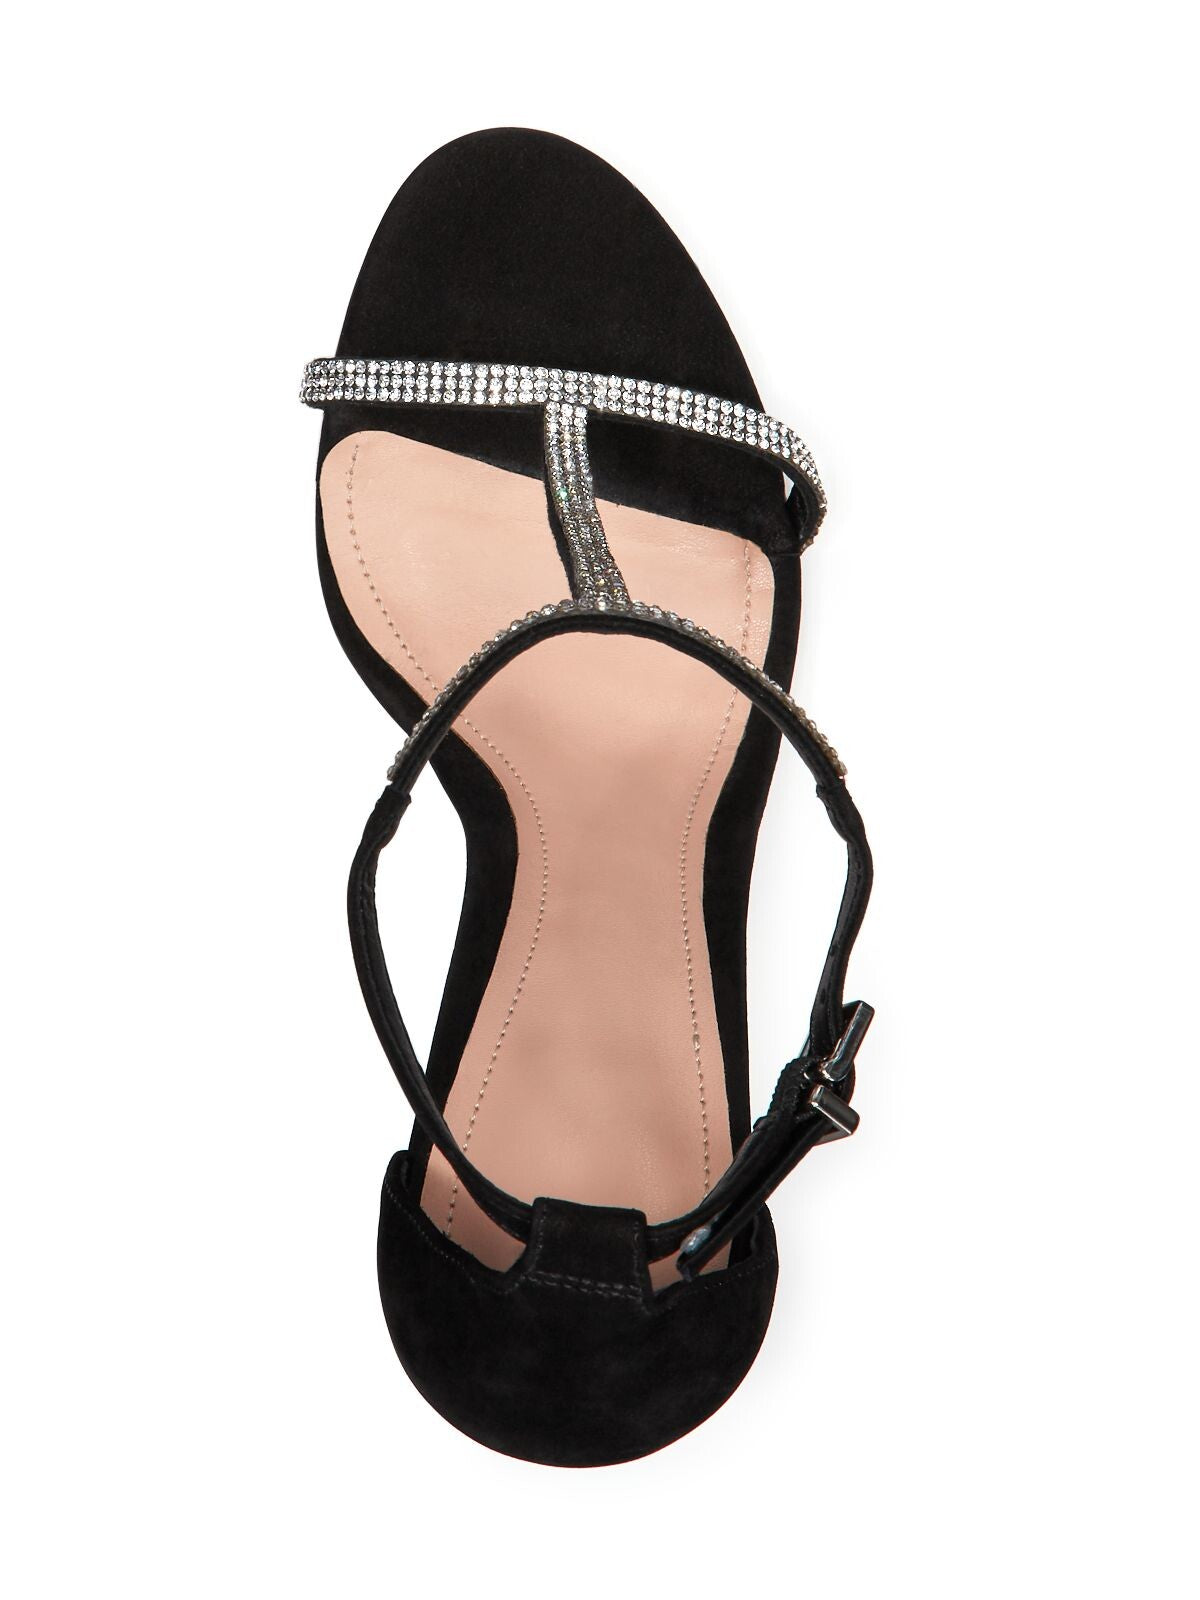 AQUA Womens Black Crystal-Embellished T-Strap Ankle Strap Hariana Open Toe Stiletto Buckle Leather Dress Sandals Shoes 8 B